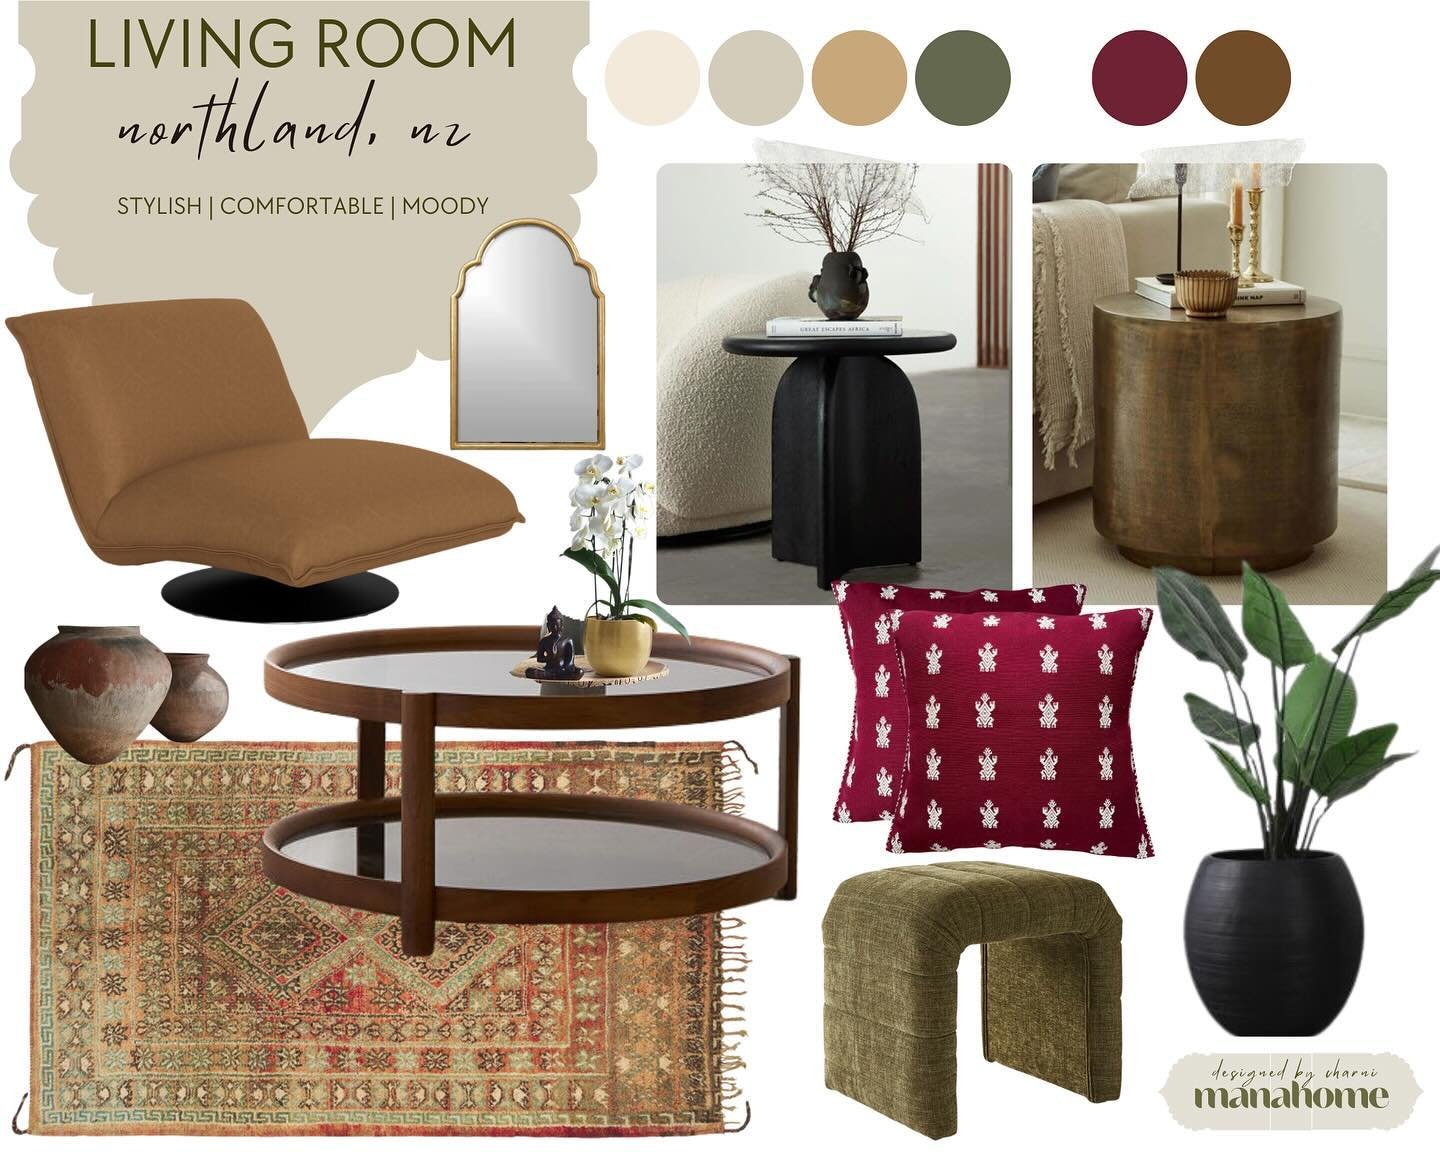 A Conscious Design Board by @manahome.design for an already beautiful living room in the North Island of New Zealand. This special client was looking for a few additional pieces to connect their space with the rest of the home 🏠💫

The existing couc